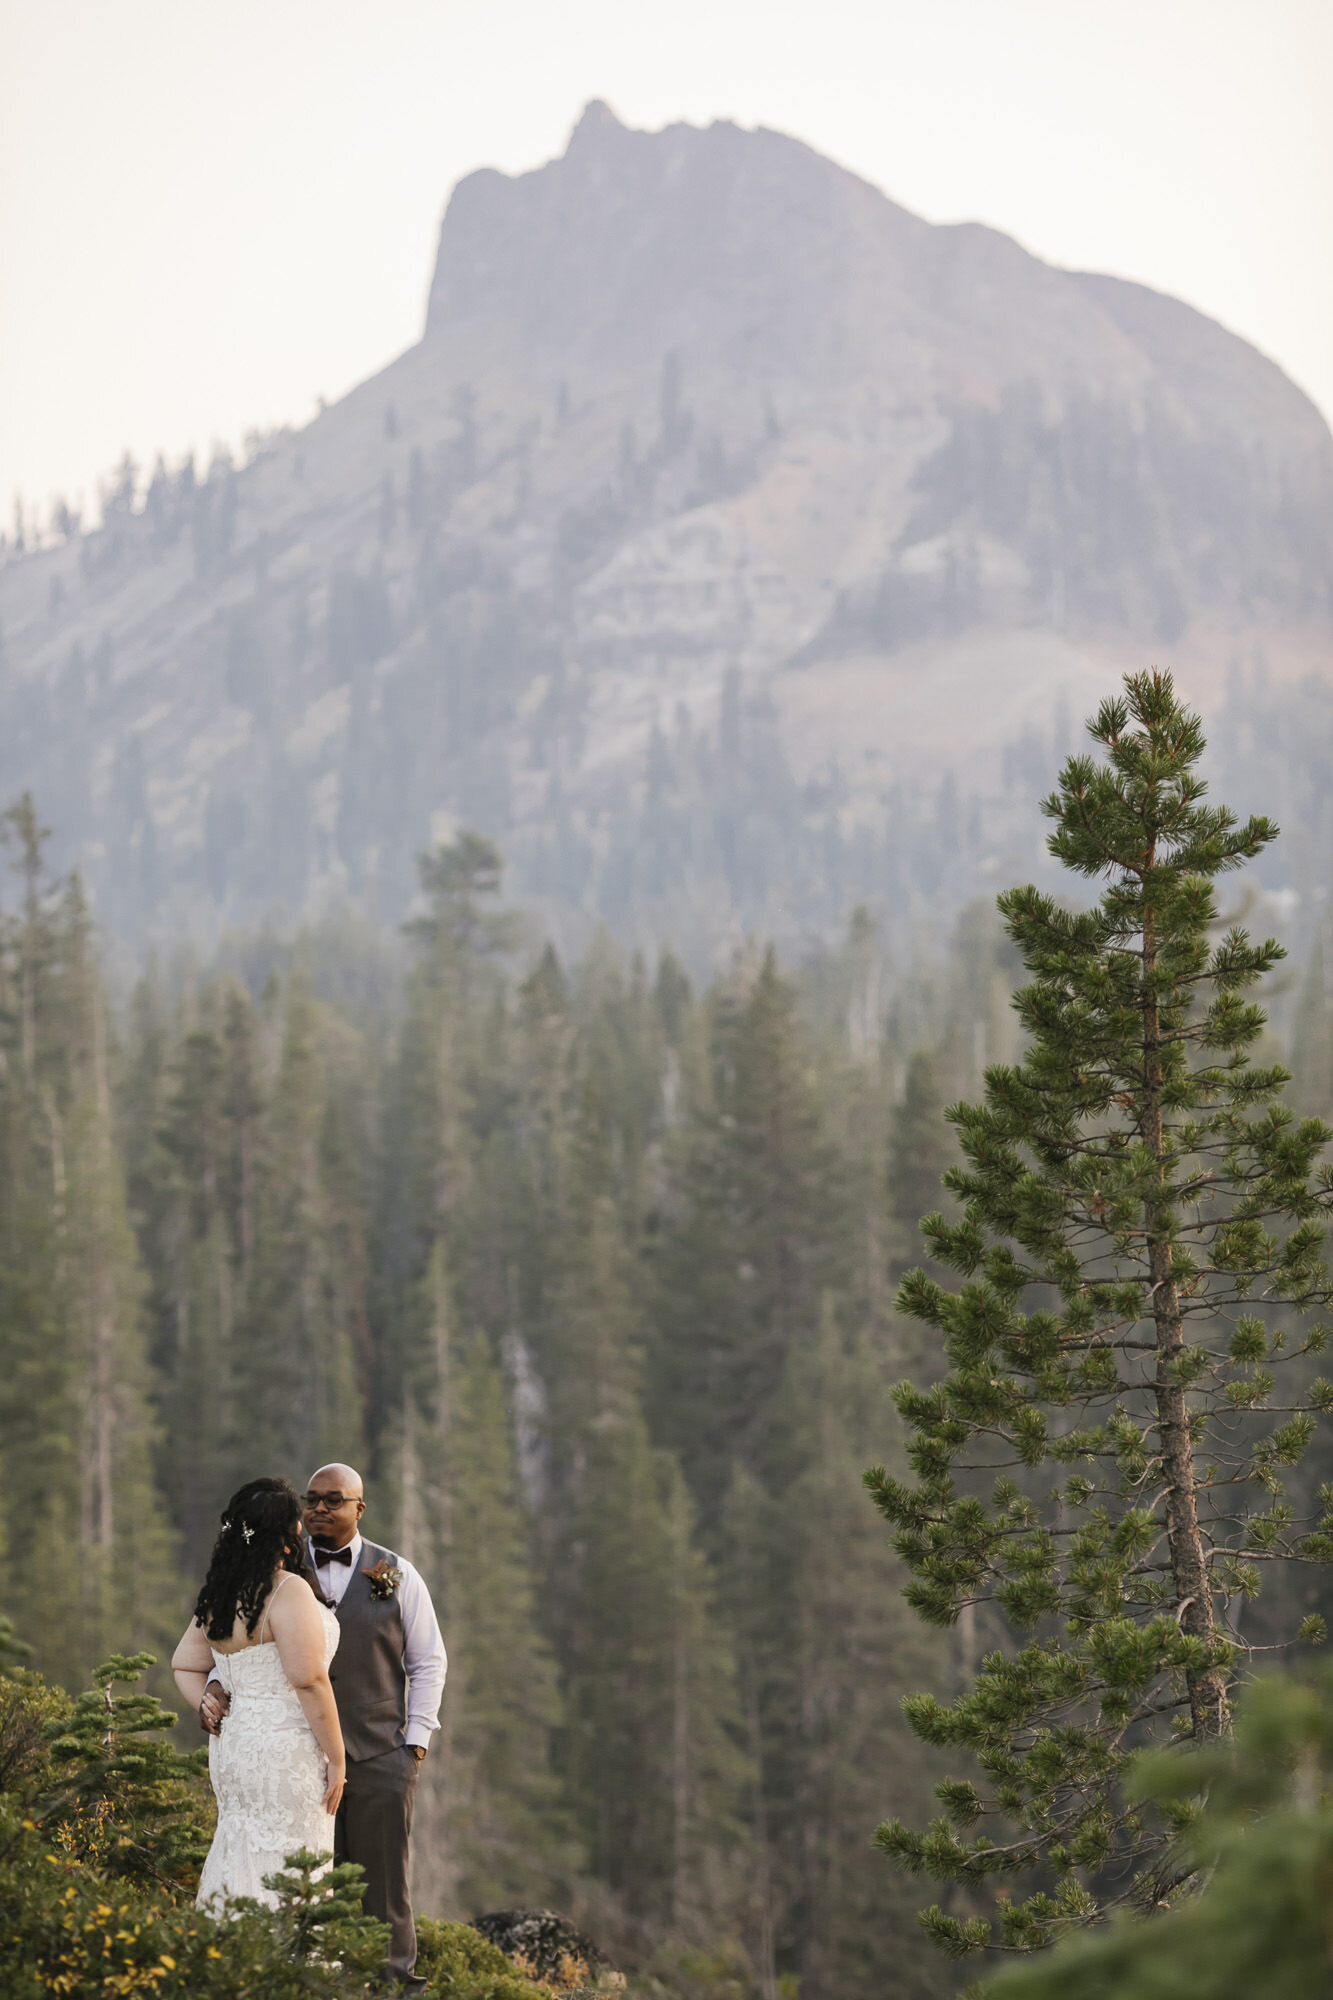 Wedding couple stand together in front of mountain peak in Tahoe forest